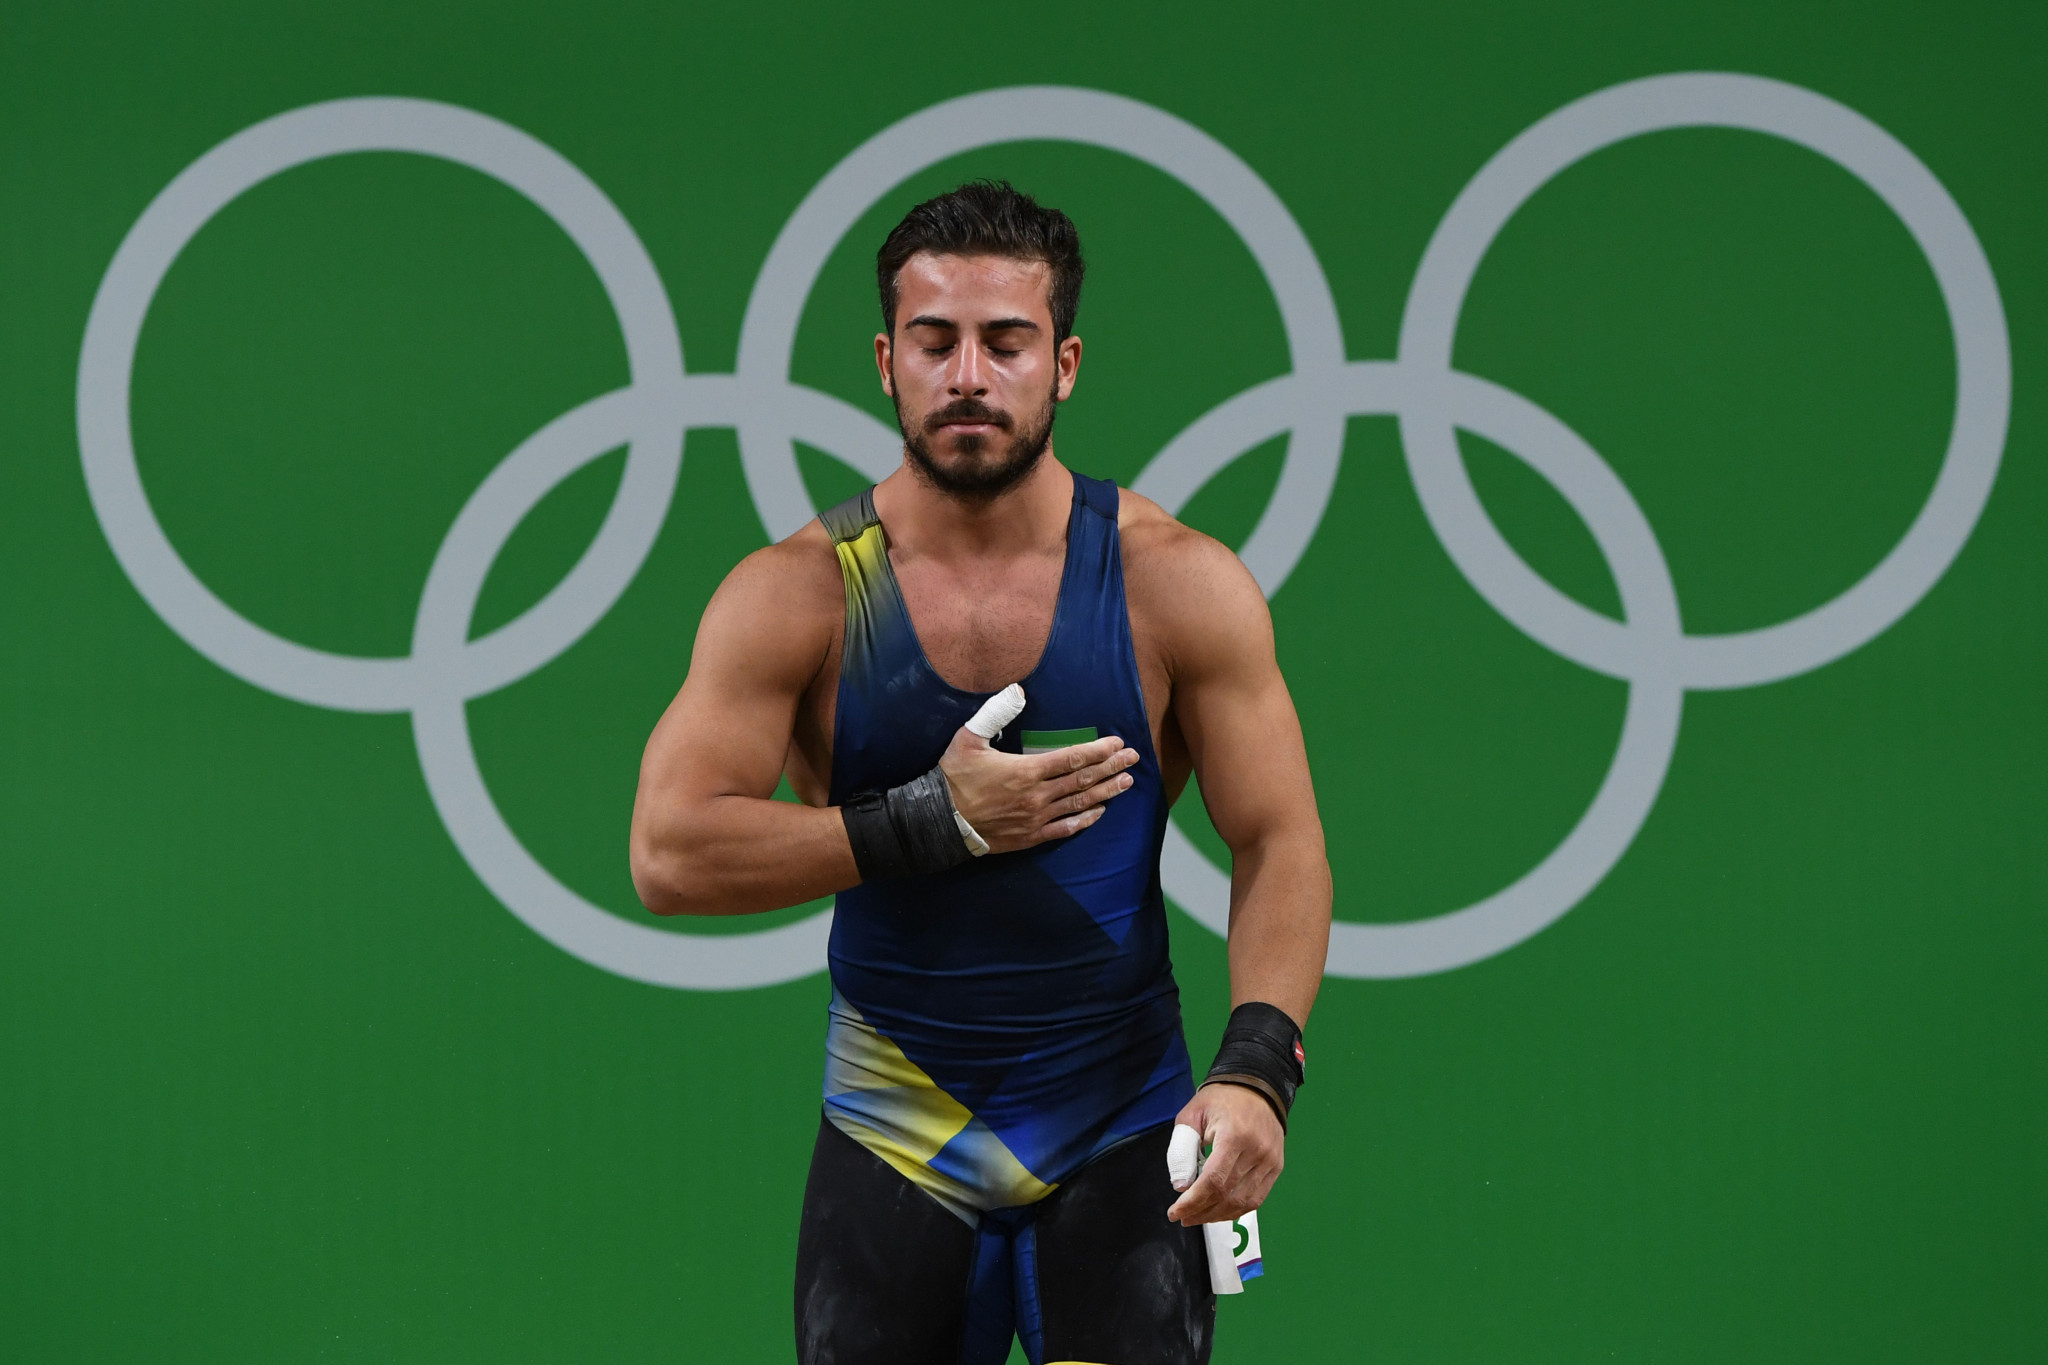 Iran's Kianoush Rostami, who has been refused a visa to enter the United States for the International Weightlifting Federation World Championships ©Getty Images